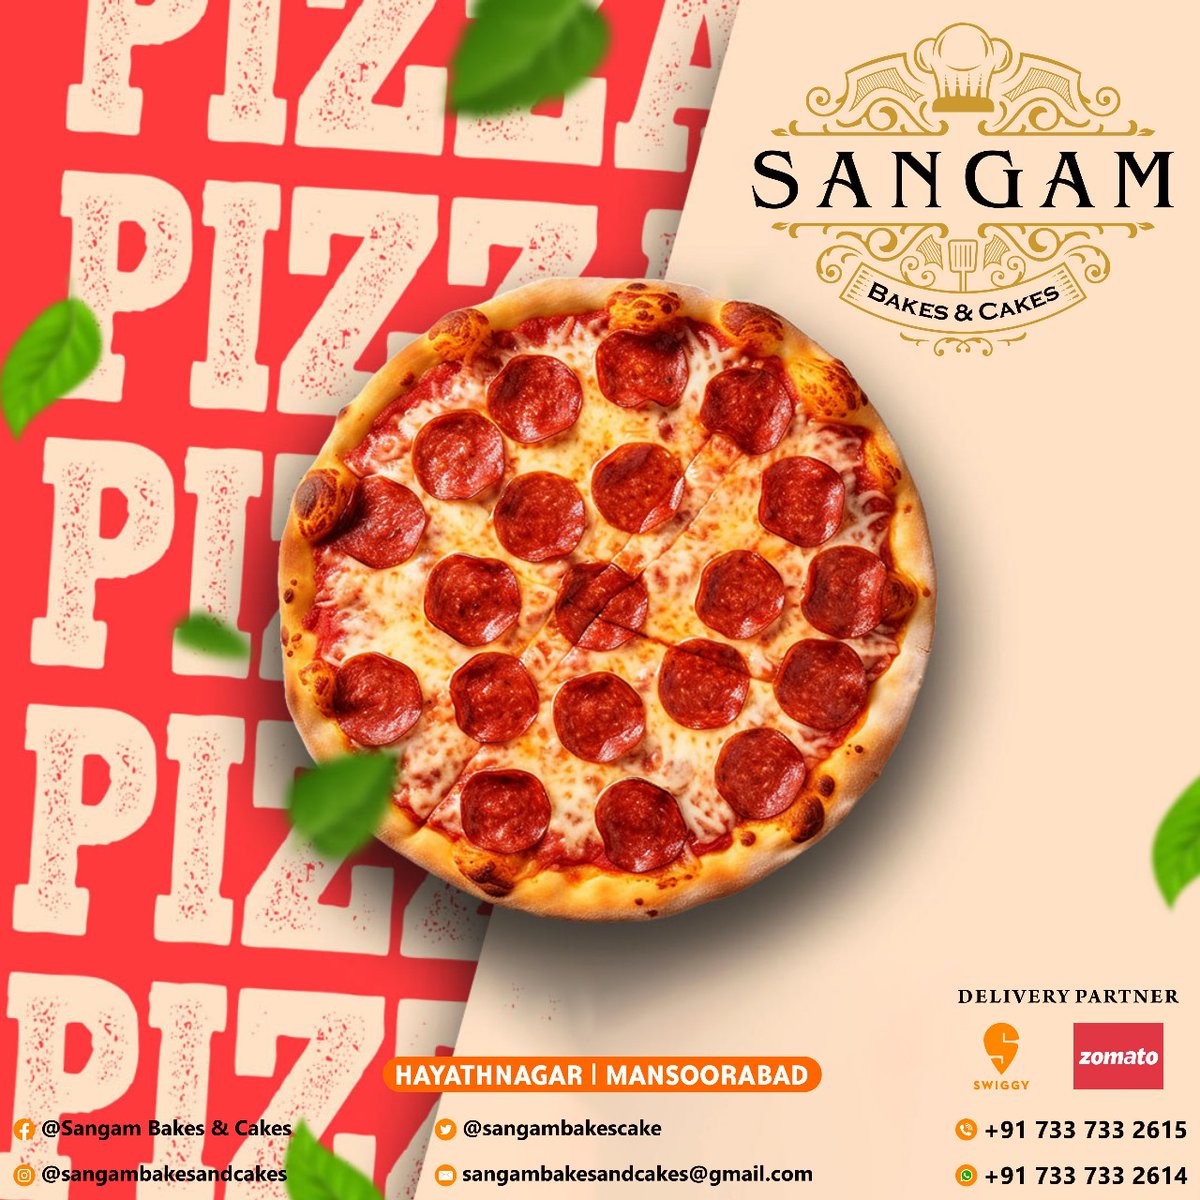 Delicious and Yummy Pizza!! @sangambcmanso

#pizza #food #foodporn #pizzalover #foodie #pizzatime #instafood #italianfood #delivery #pizzalovers #pasta #pizzeria #foodblogger #foodphotography #foodlover #yummy #foodstagram #delicious #pizzaria #instagood #love #restaurant